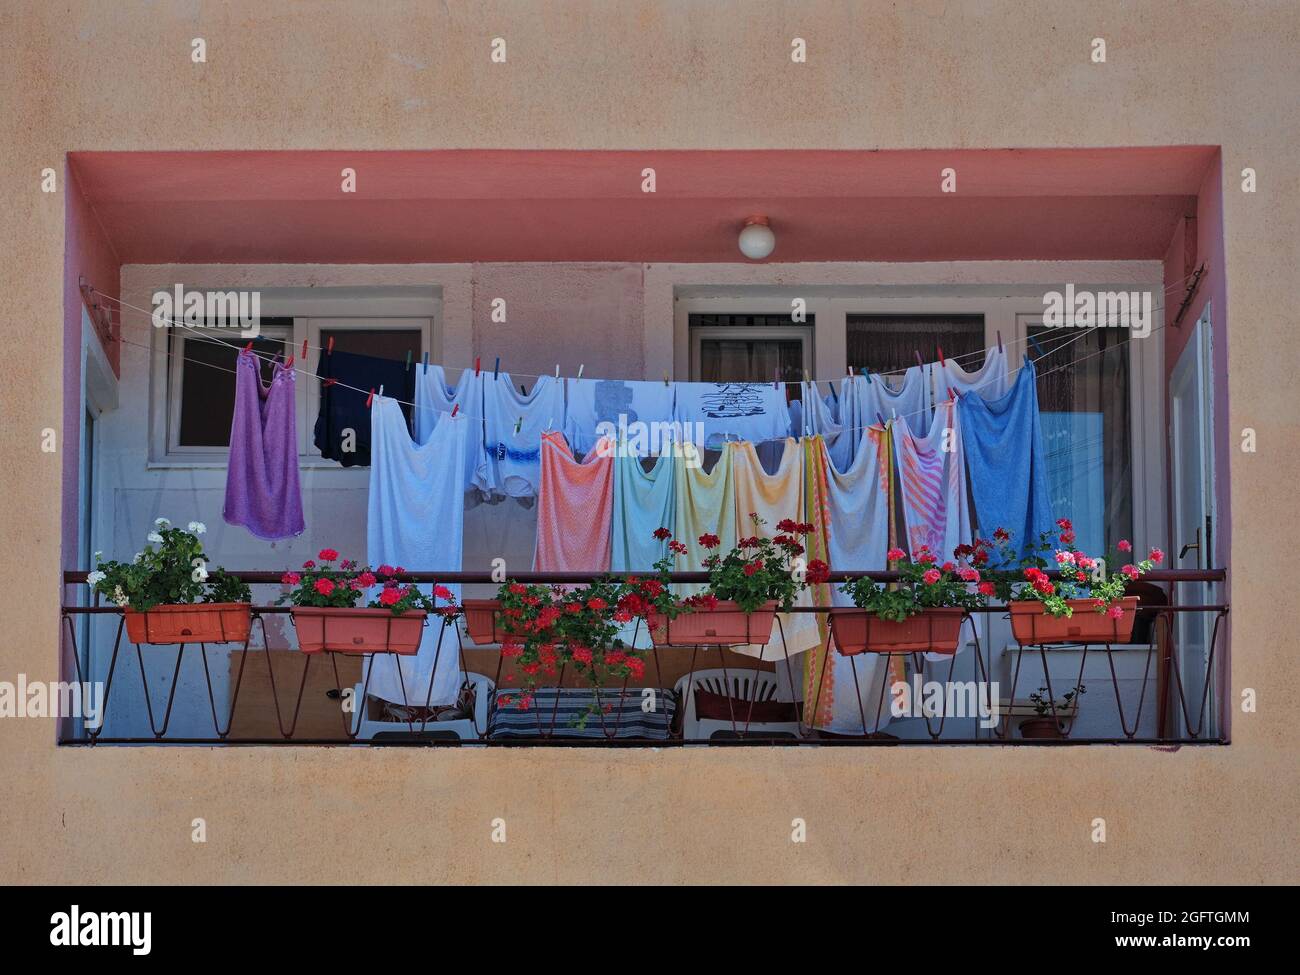 Laundry drying on the balcony of a building Stock Photo